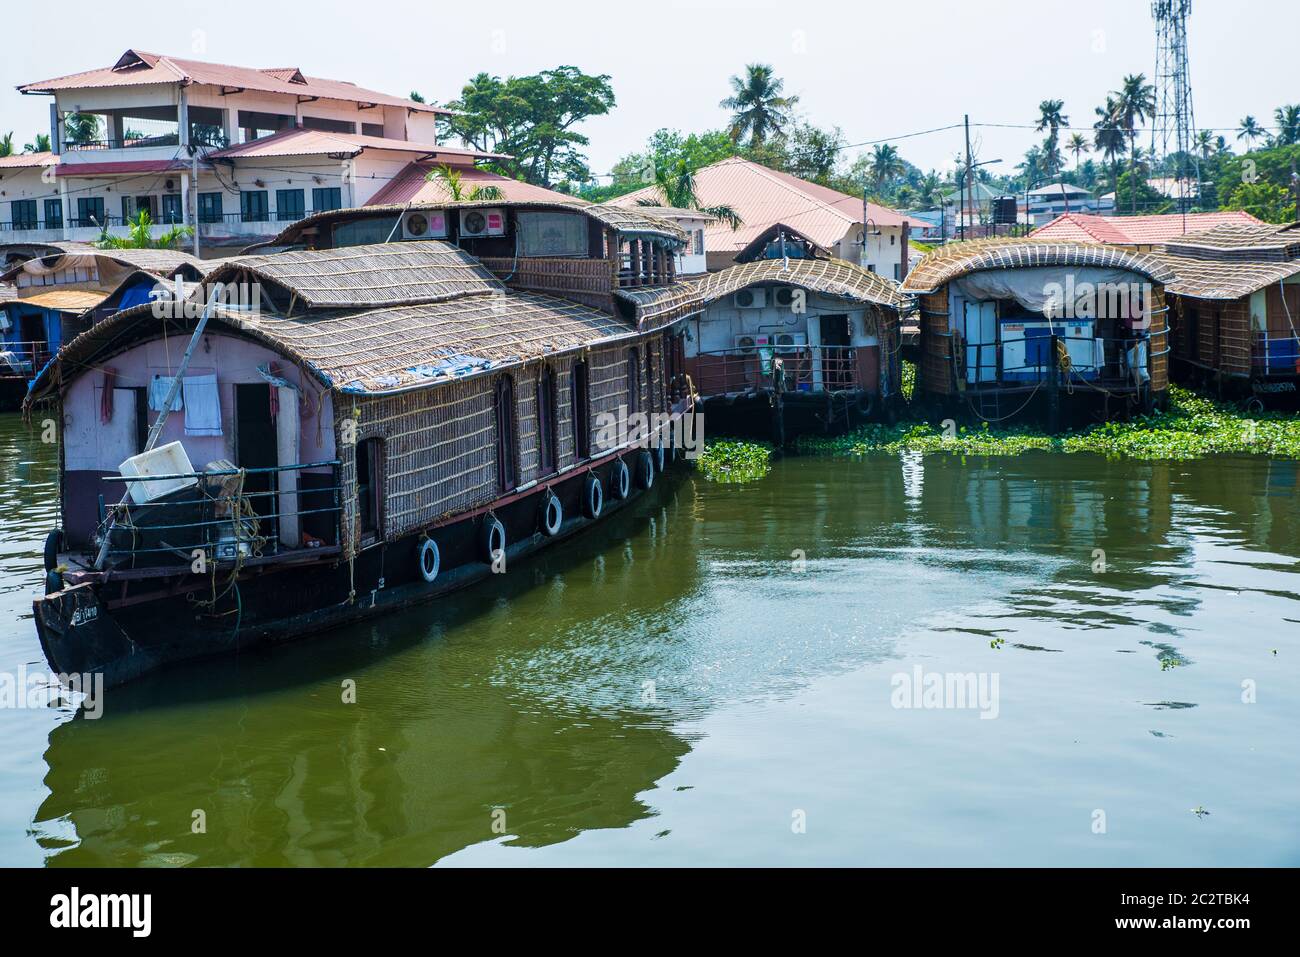 Small houses in a local village located next to Kerala's backwater on a bright sunny day and traditional Houseboat seen sailing through the river Stock Photo